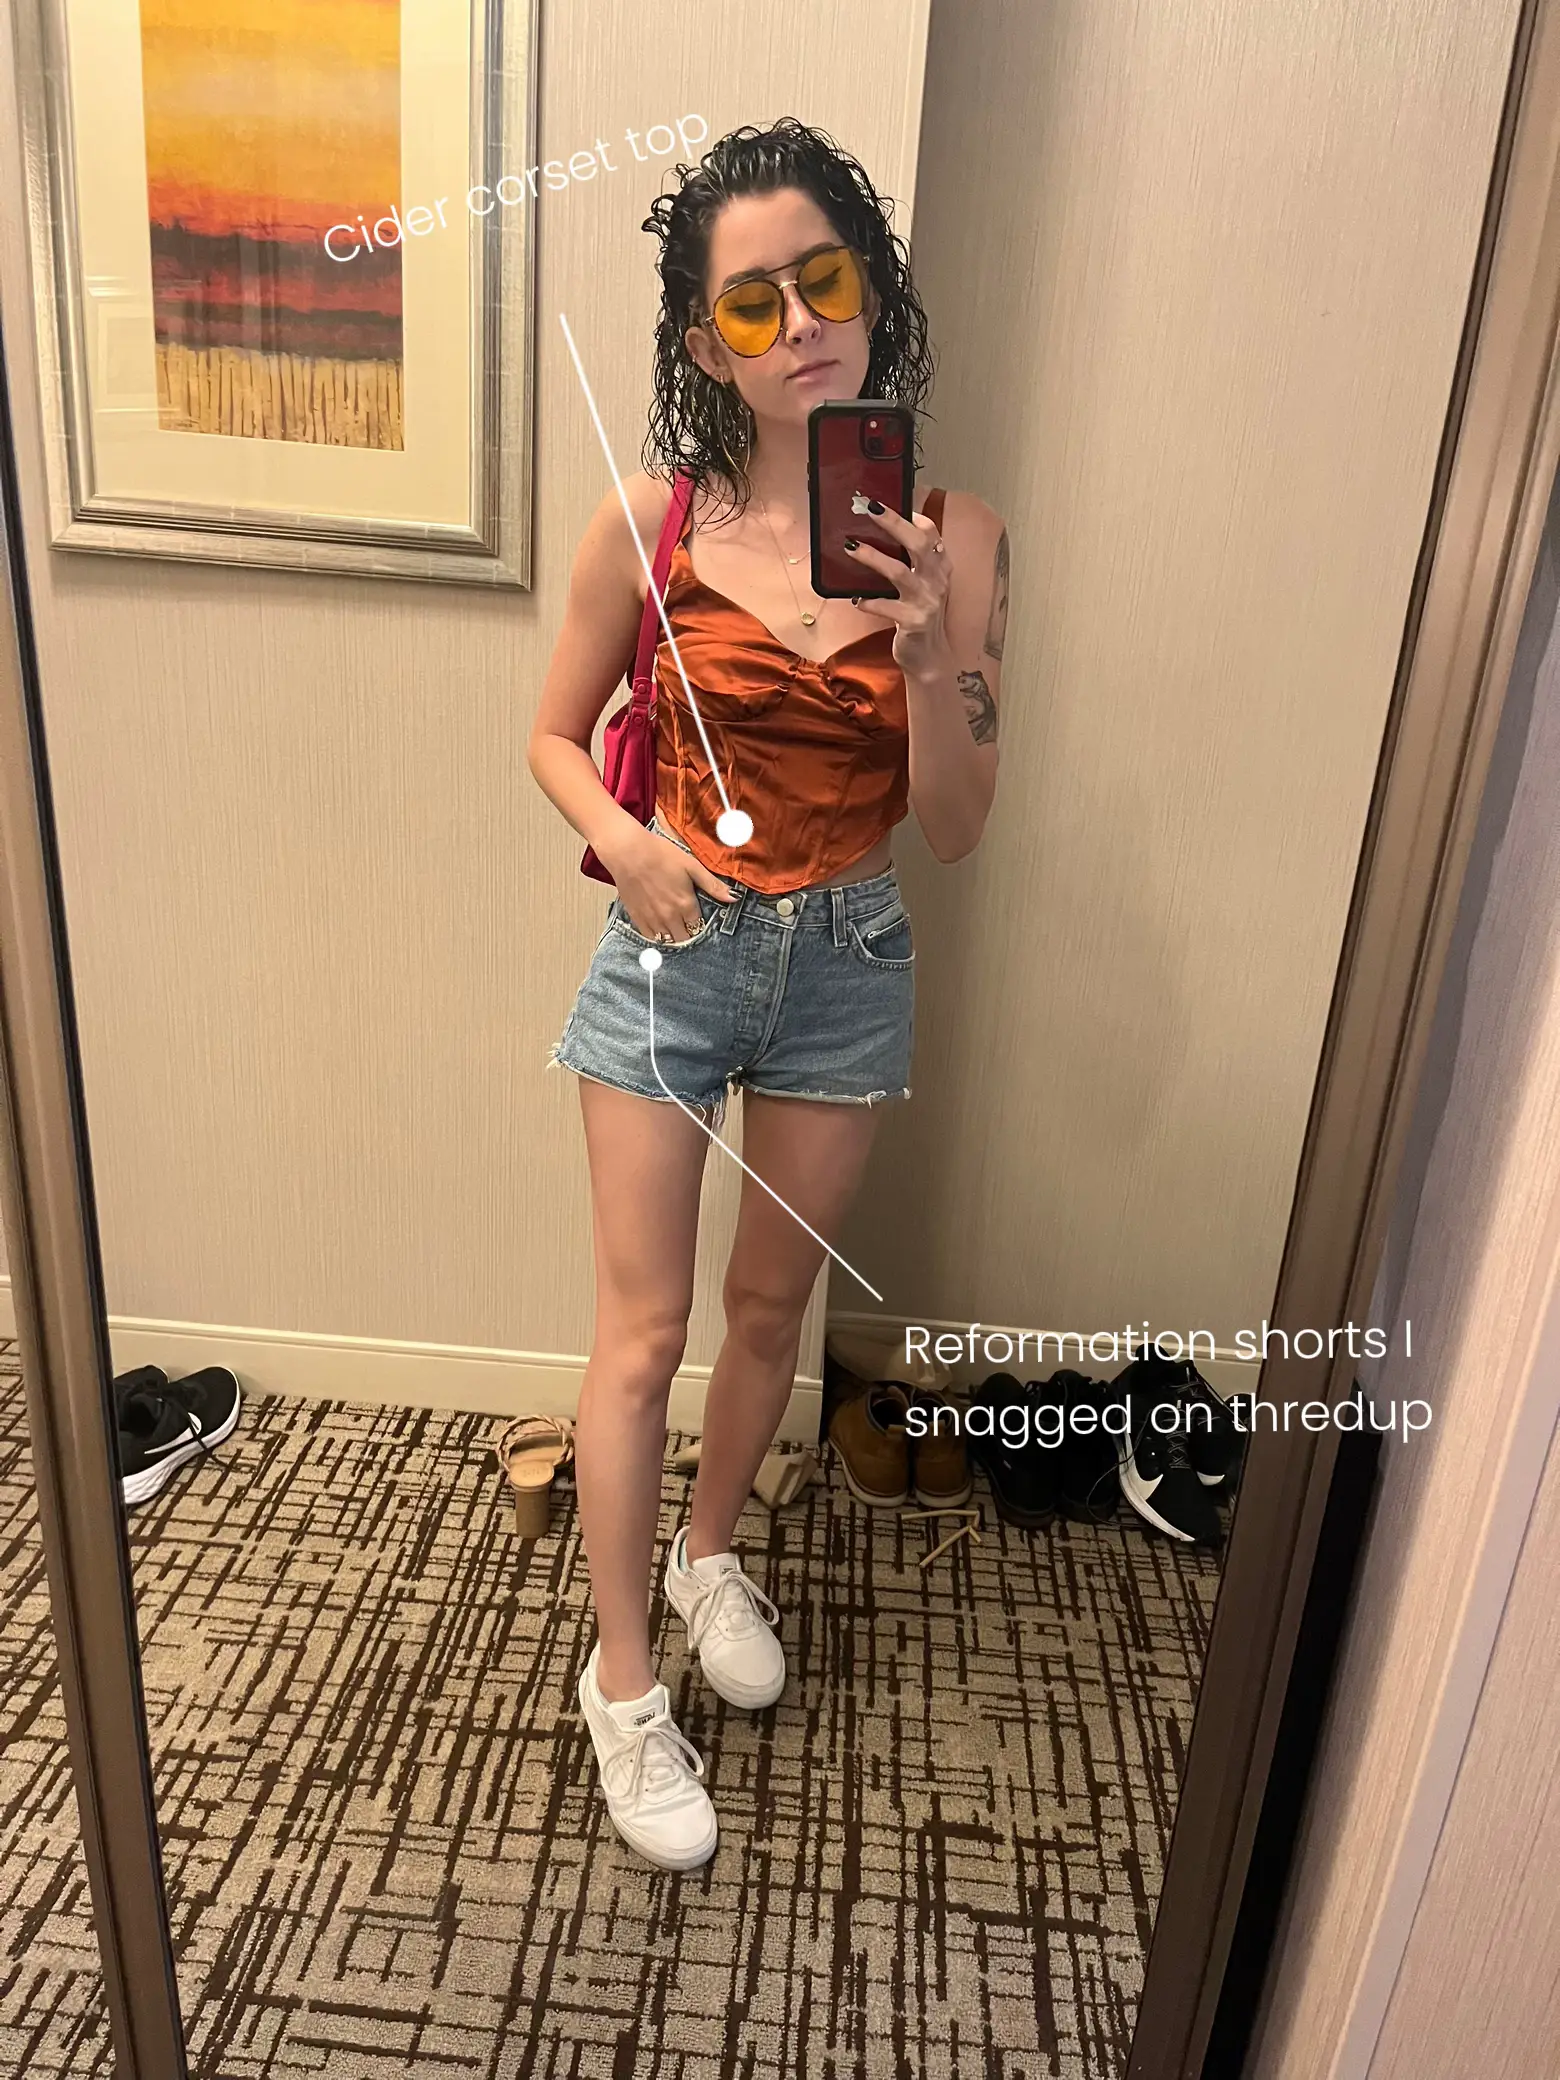 Night out in Vegas: what I wore and where I ate, Gallery posted by Madison